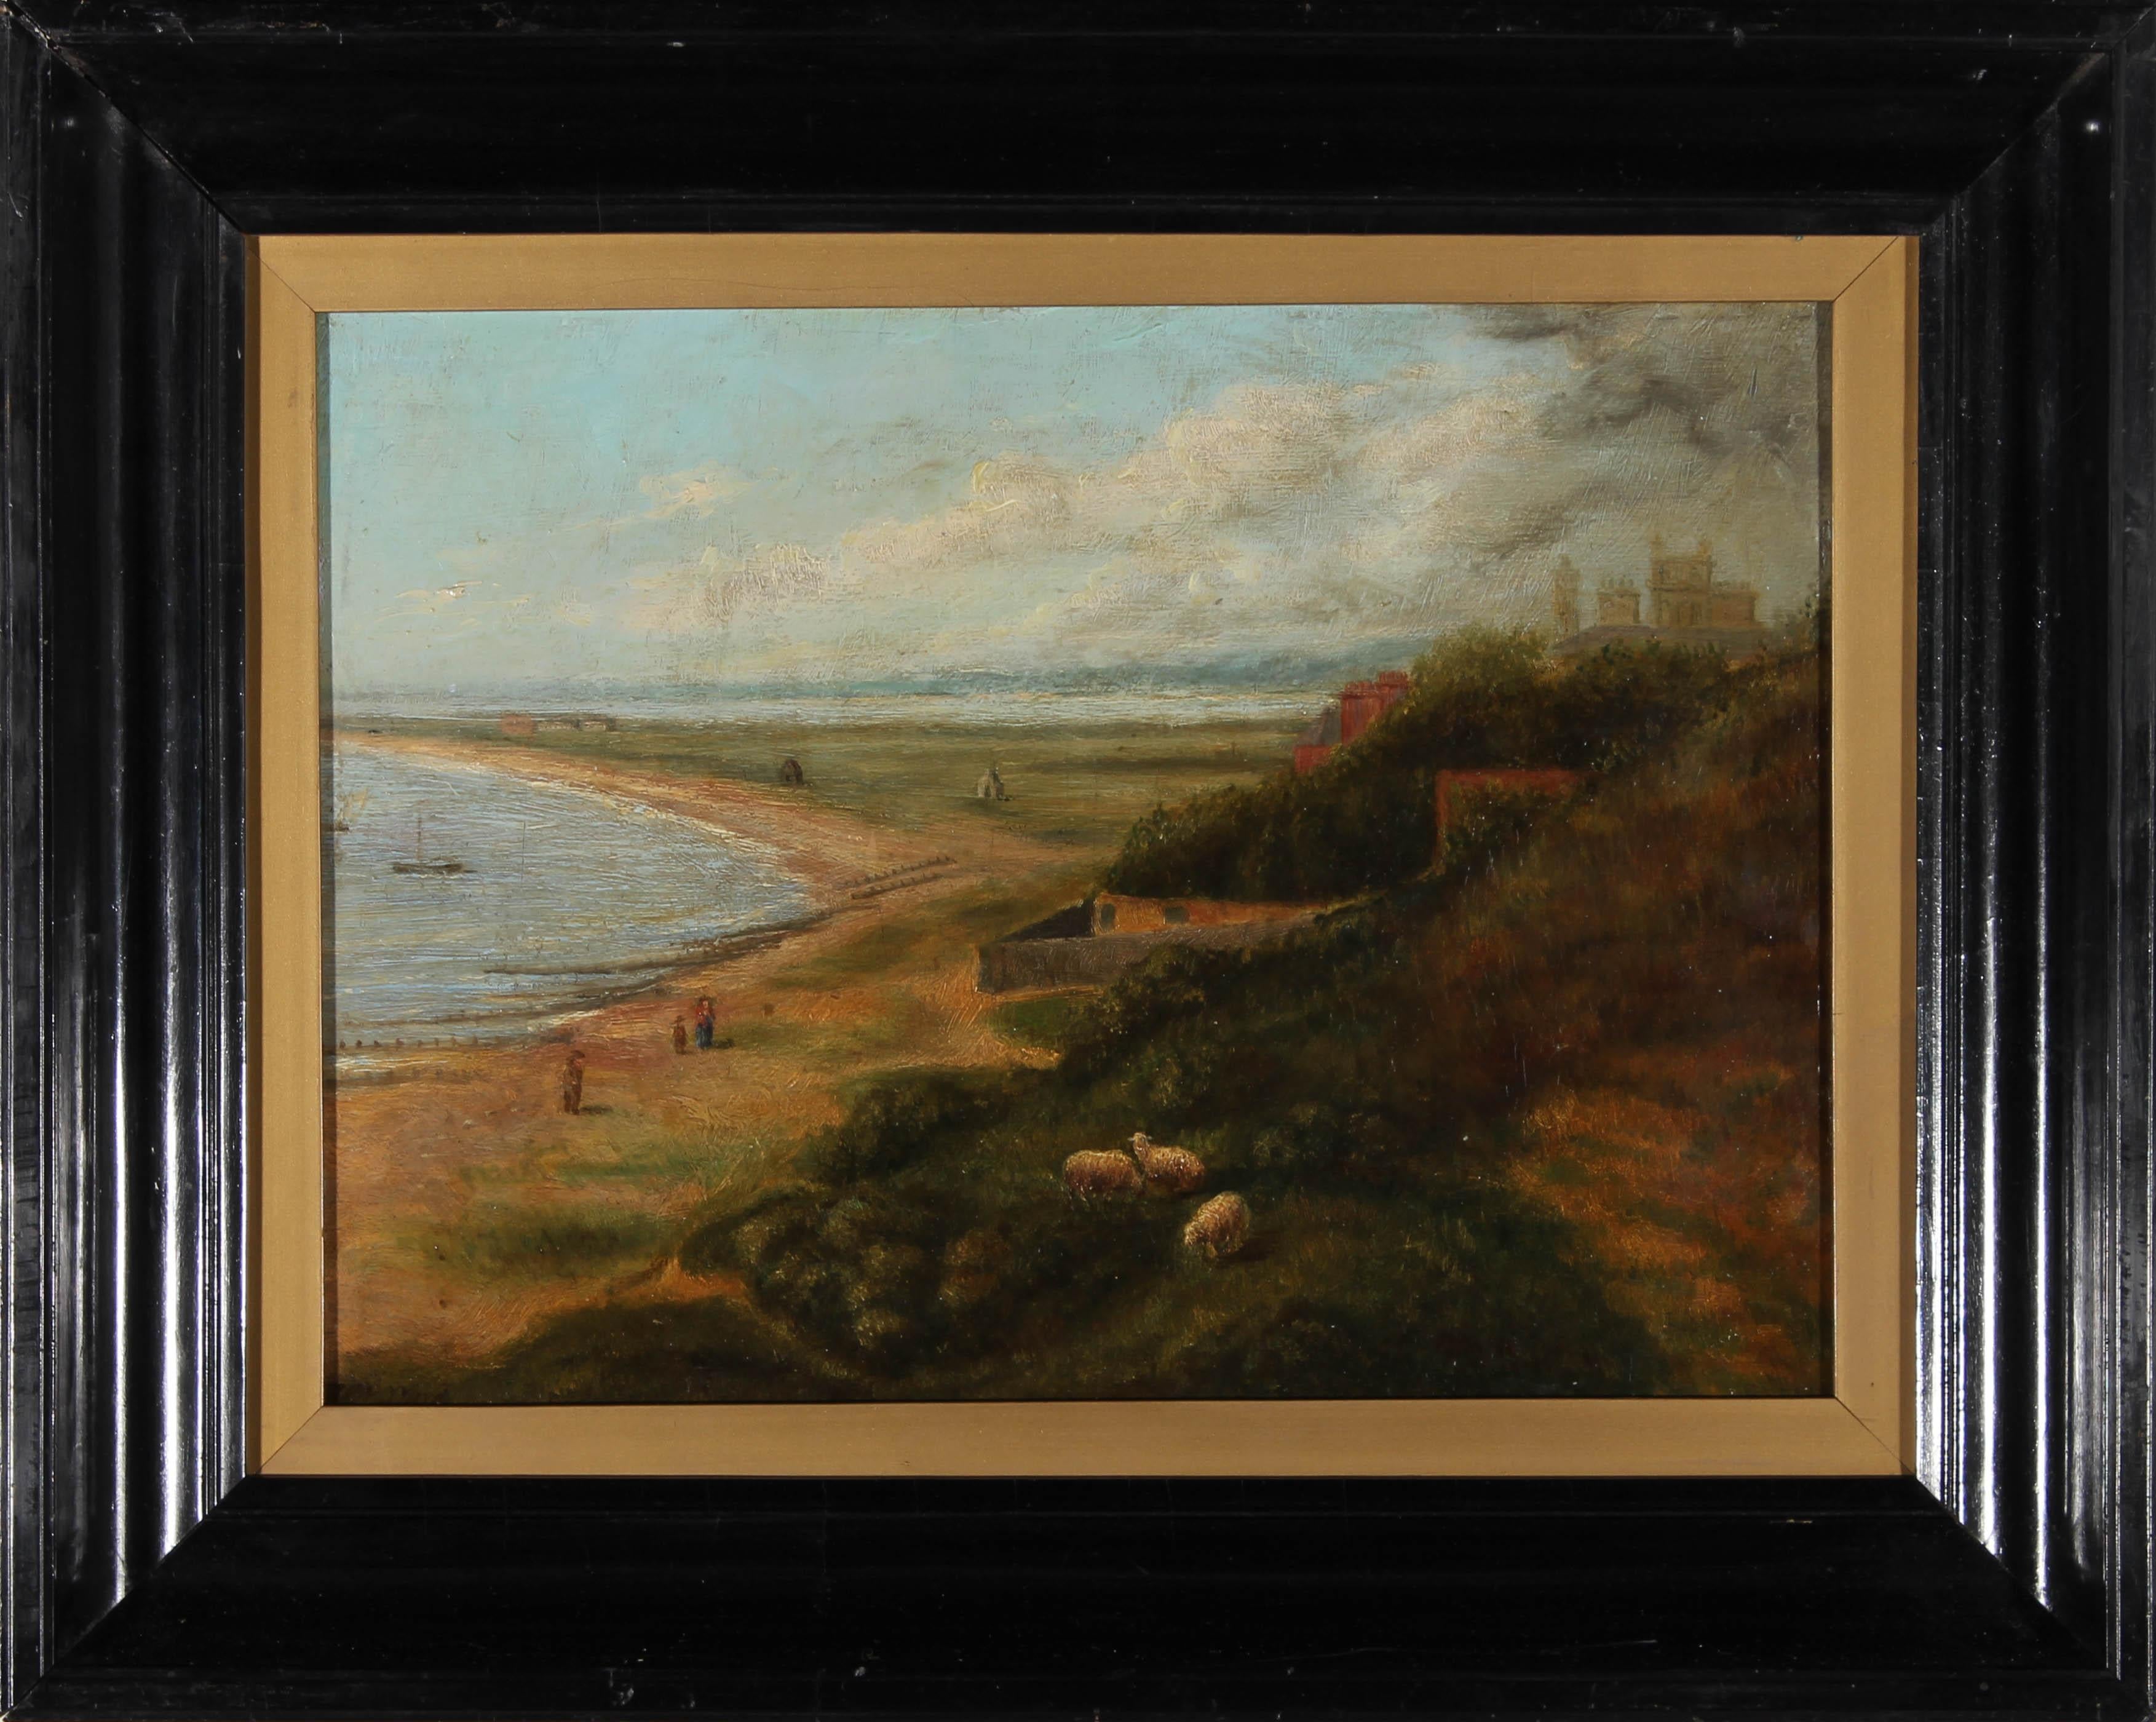 A charmingly naive piece of English folk art from the 19th Century, showing a topographical view of a coastal stretch with sheep grazing in the foreground and rooftops visible above the trees to the right. The artist has signed to the lower left